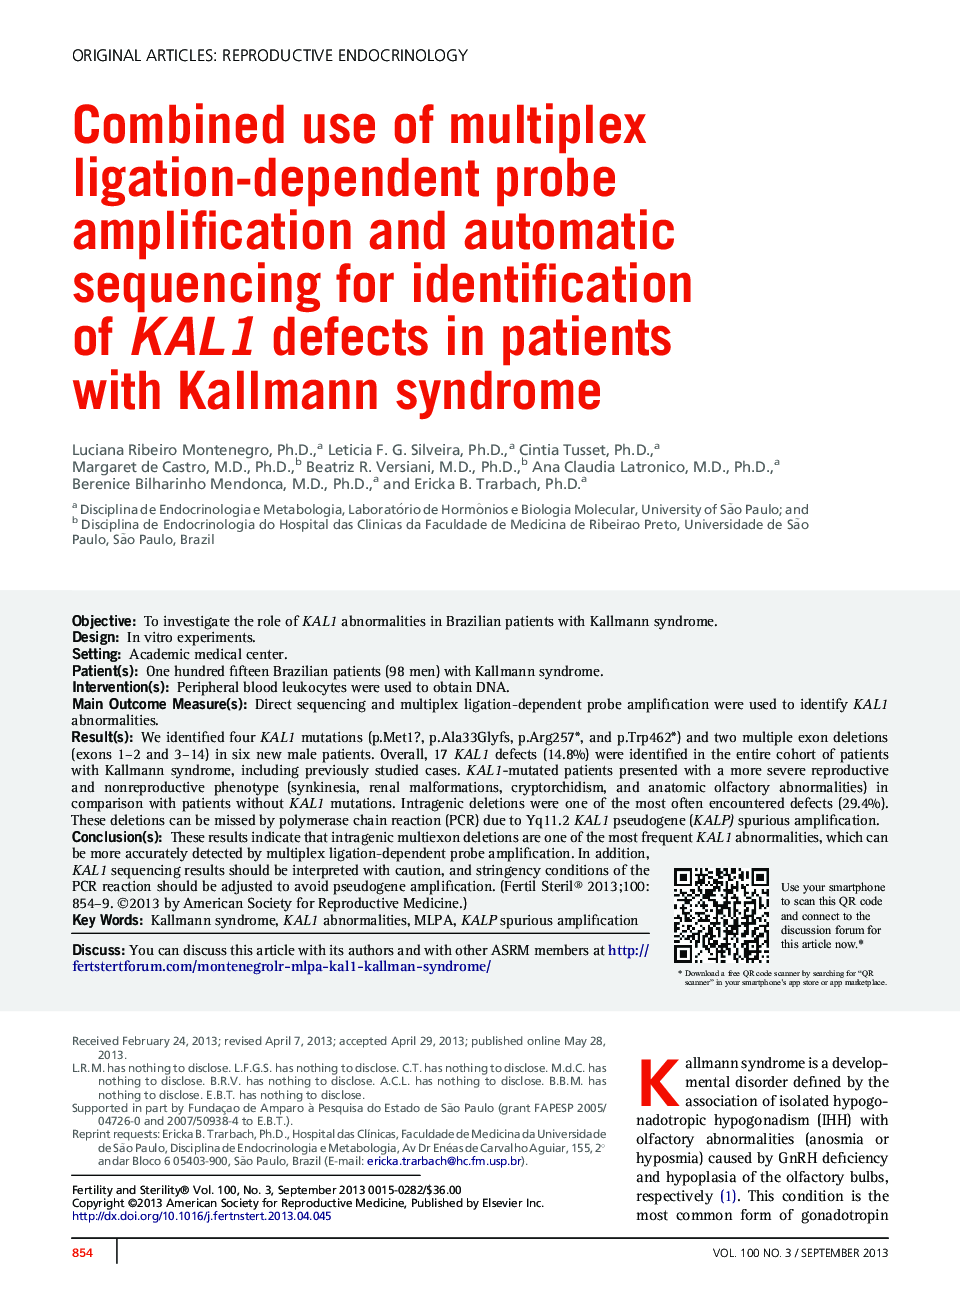 Combined use of multiplex ligation-dependent probe amplification and automatic sequencing for identification of KAL1 defects in patients with Kallmann syndrome 